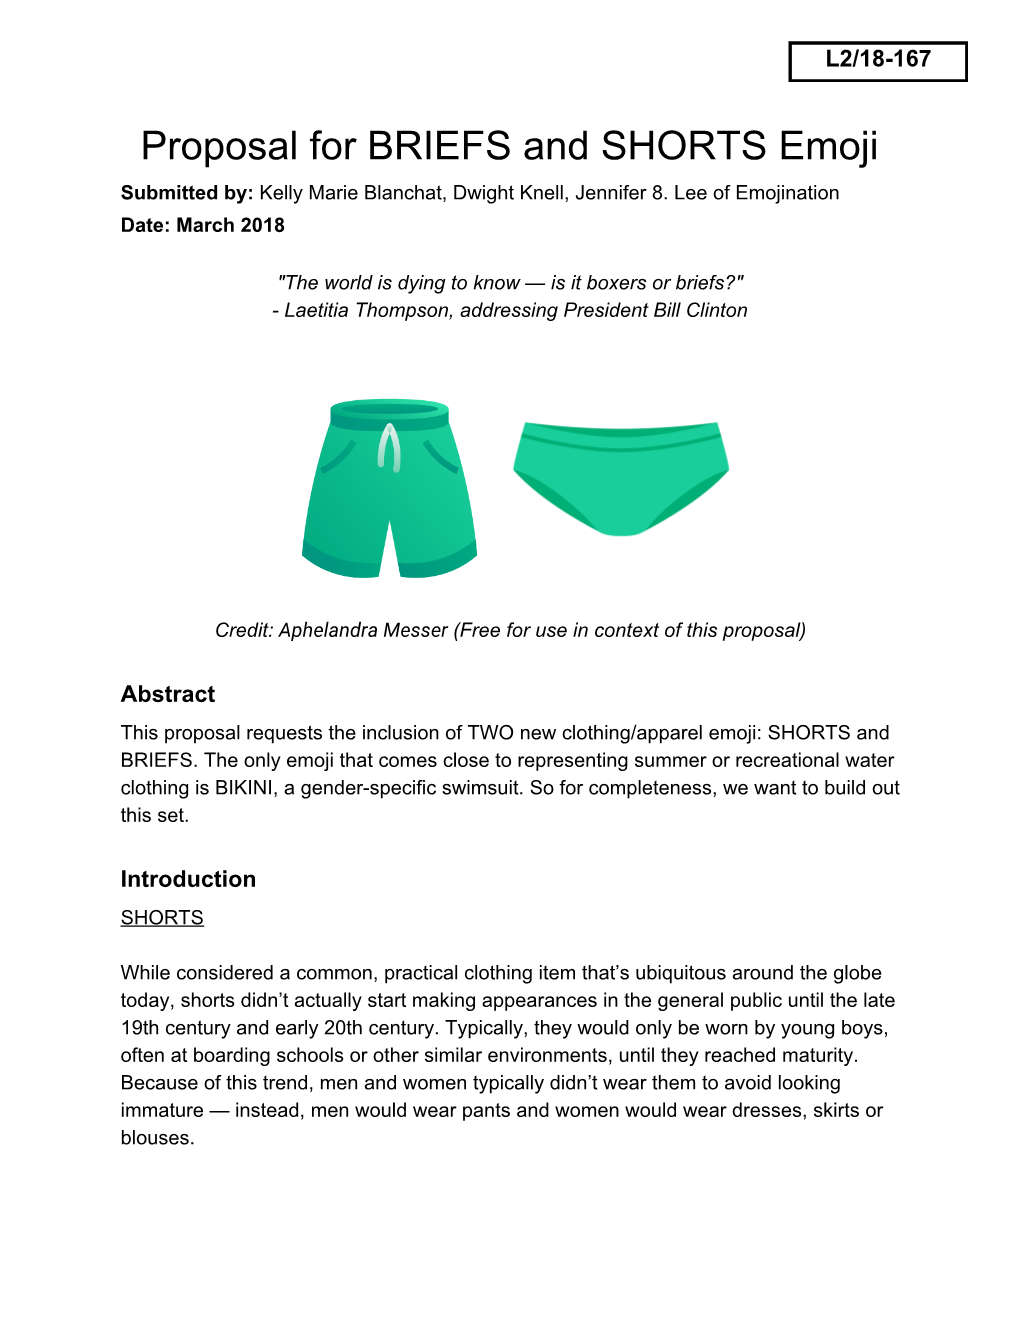 Proposal for BRIEFS and SHORTS Emoji Submitted By: ​Kelly Marie Blanchat, Dwight Knell, Jennifer 8